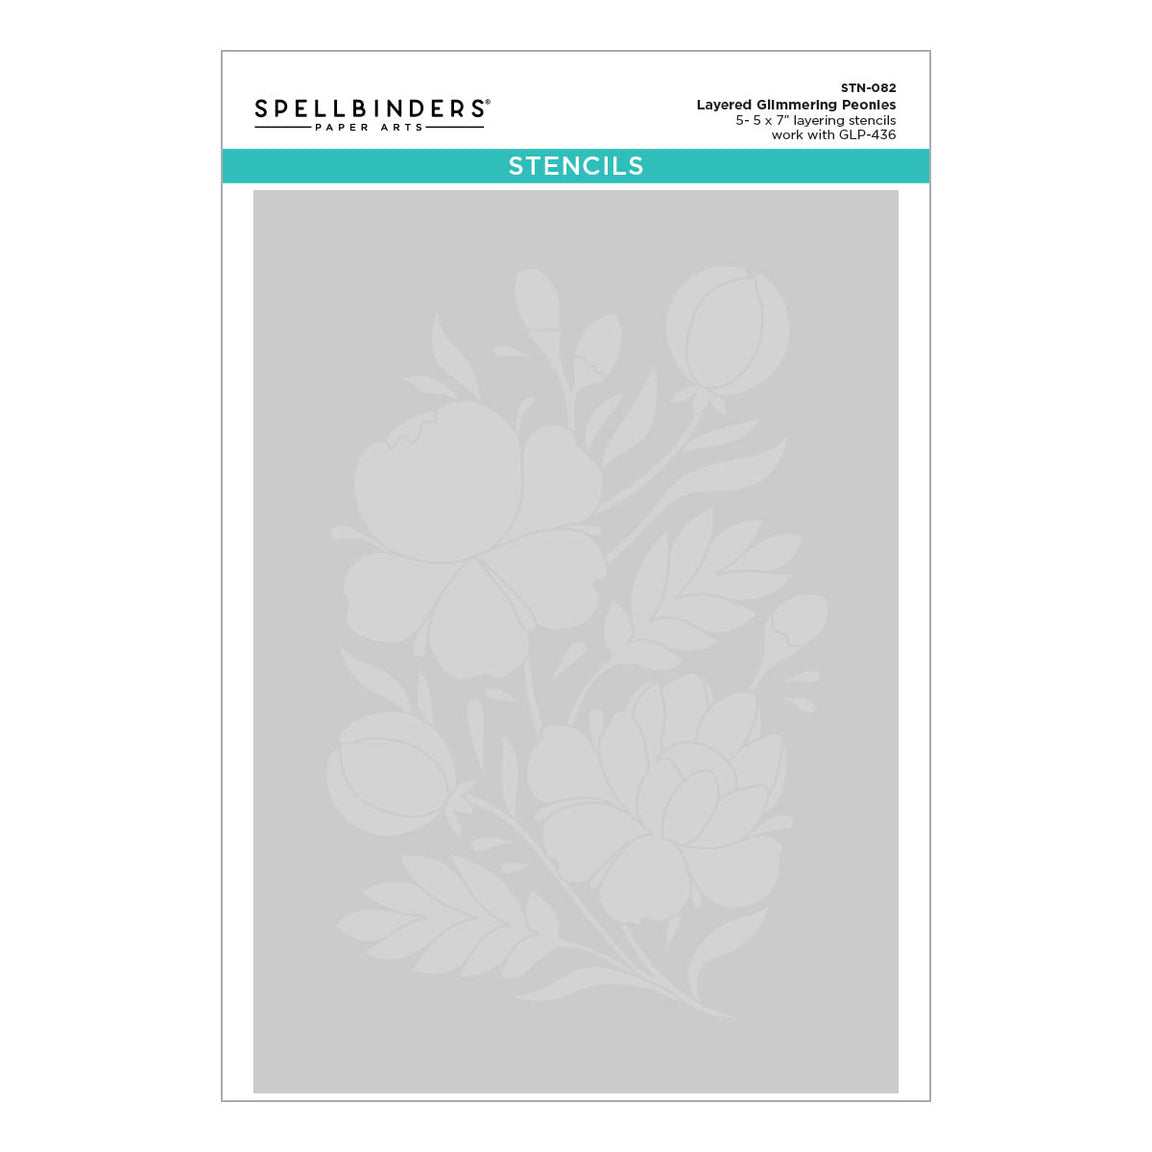 Spellbinders Glimmering Peonies Glimmer Plate & Stencil Bundle - Glimmering Flowers Collection